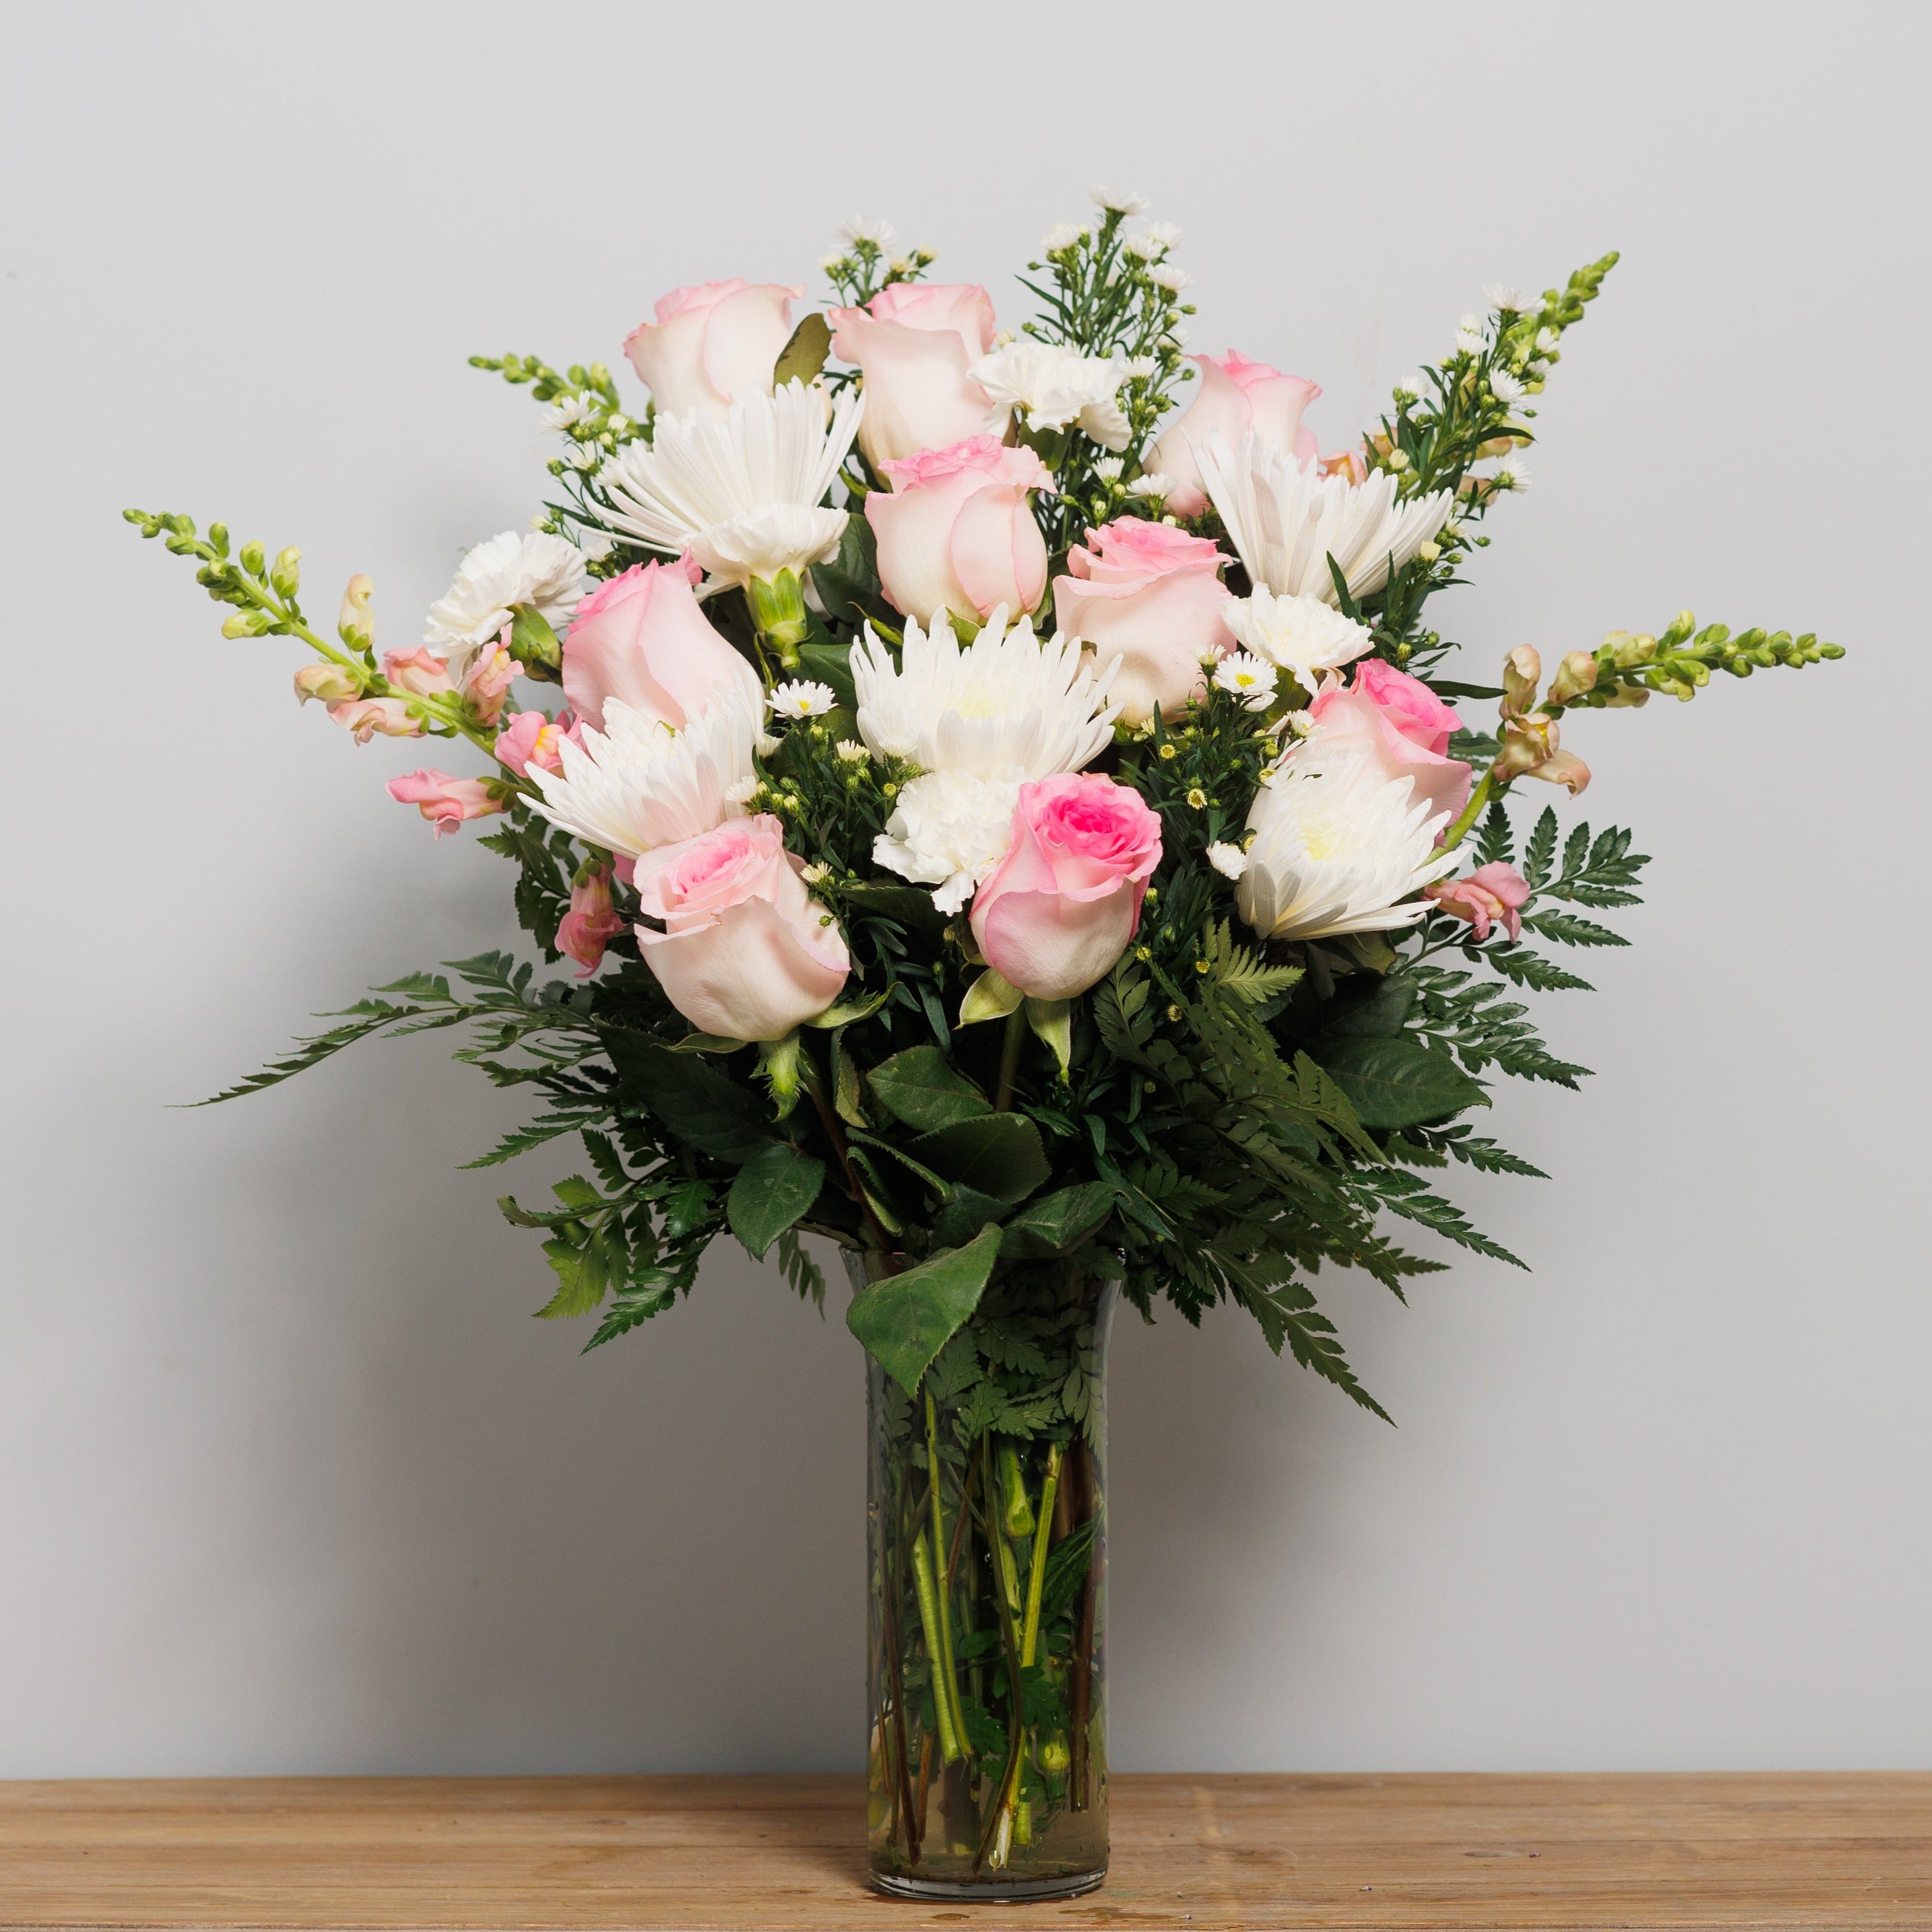 A vase arrangement with light pink roses and white mums.